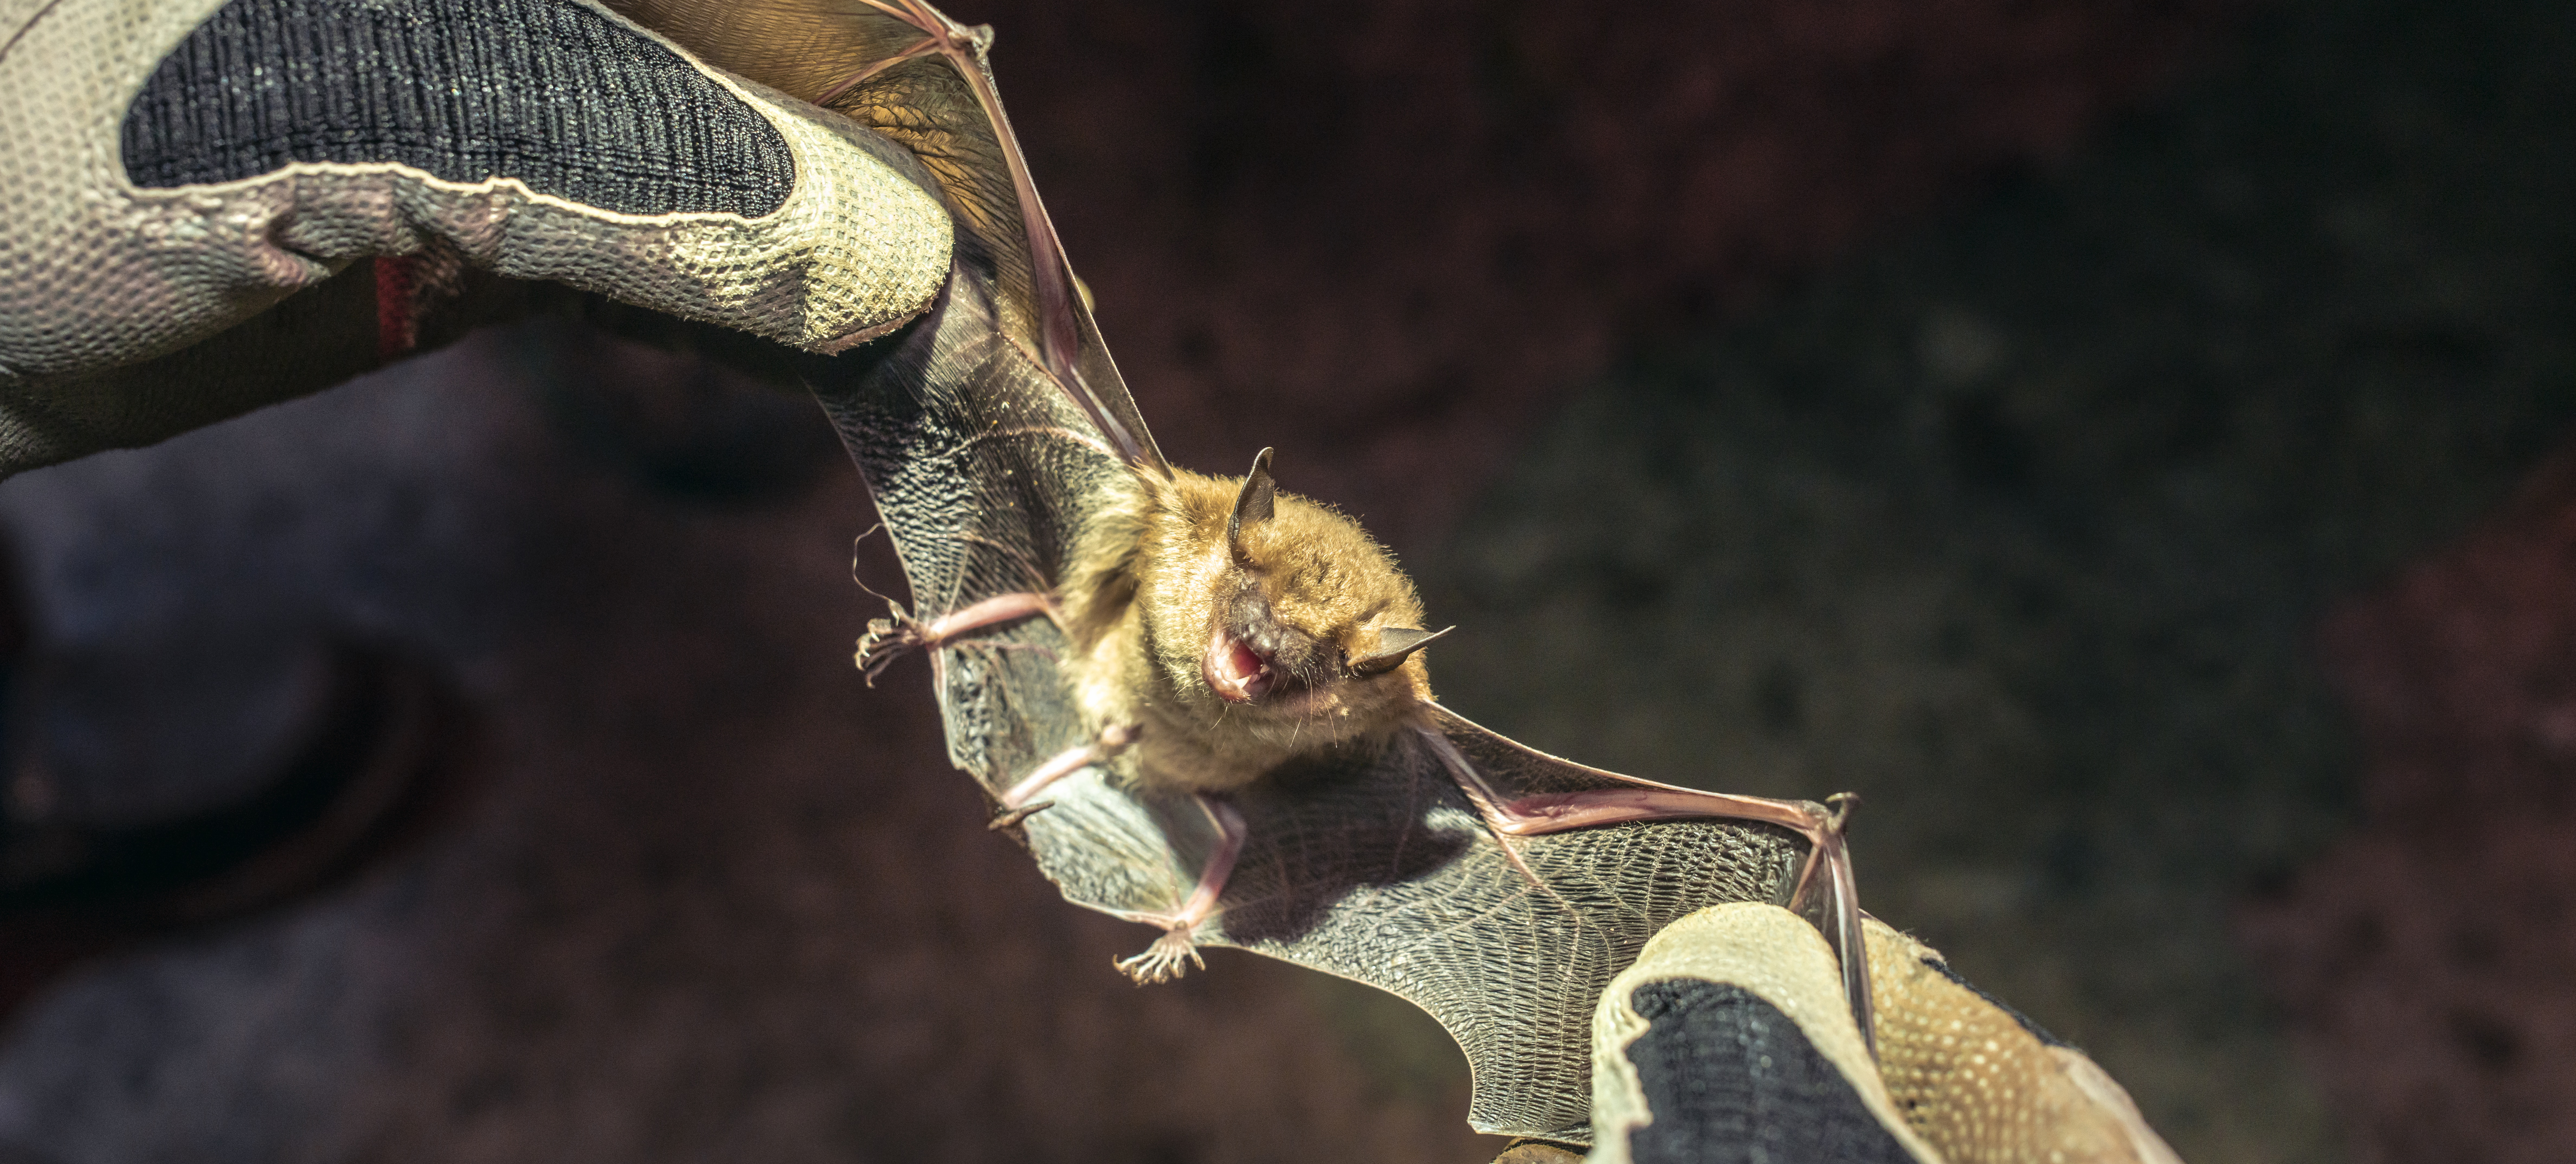 close up of bat with wings spread by gloved hands